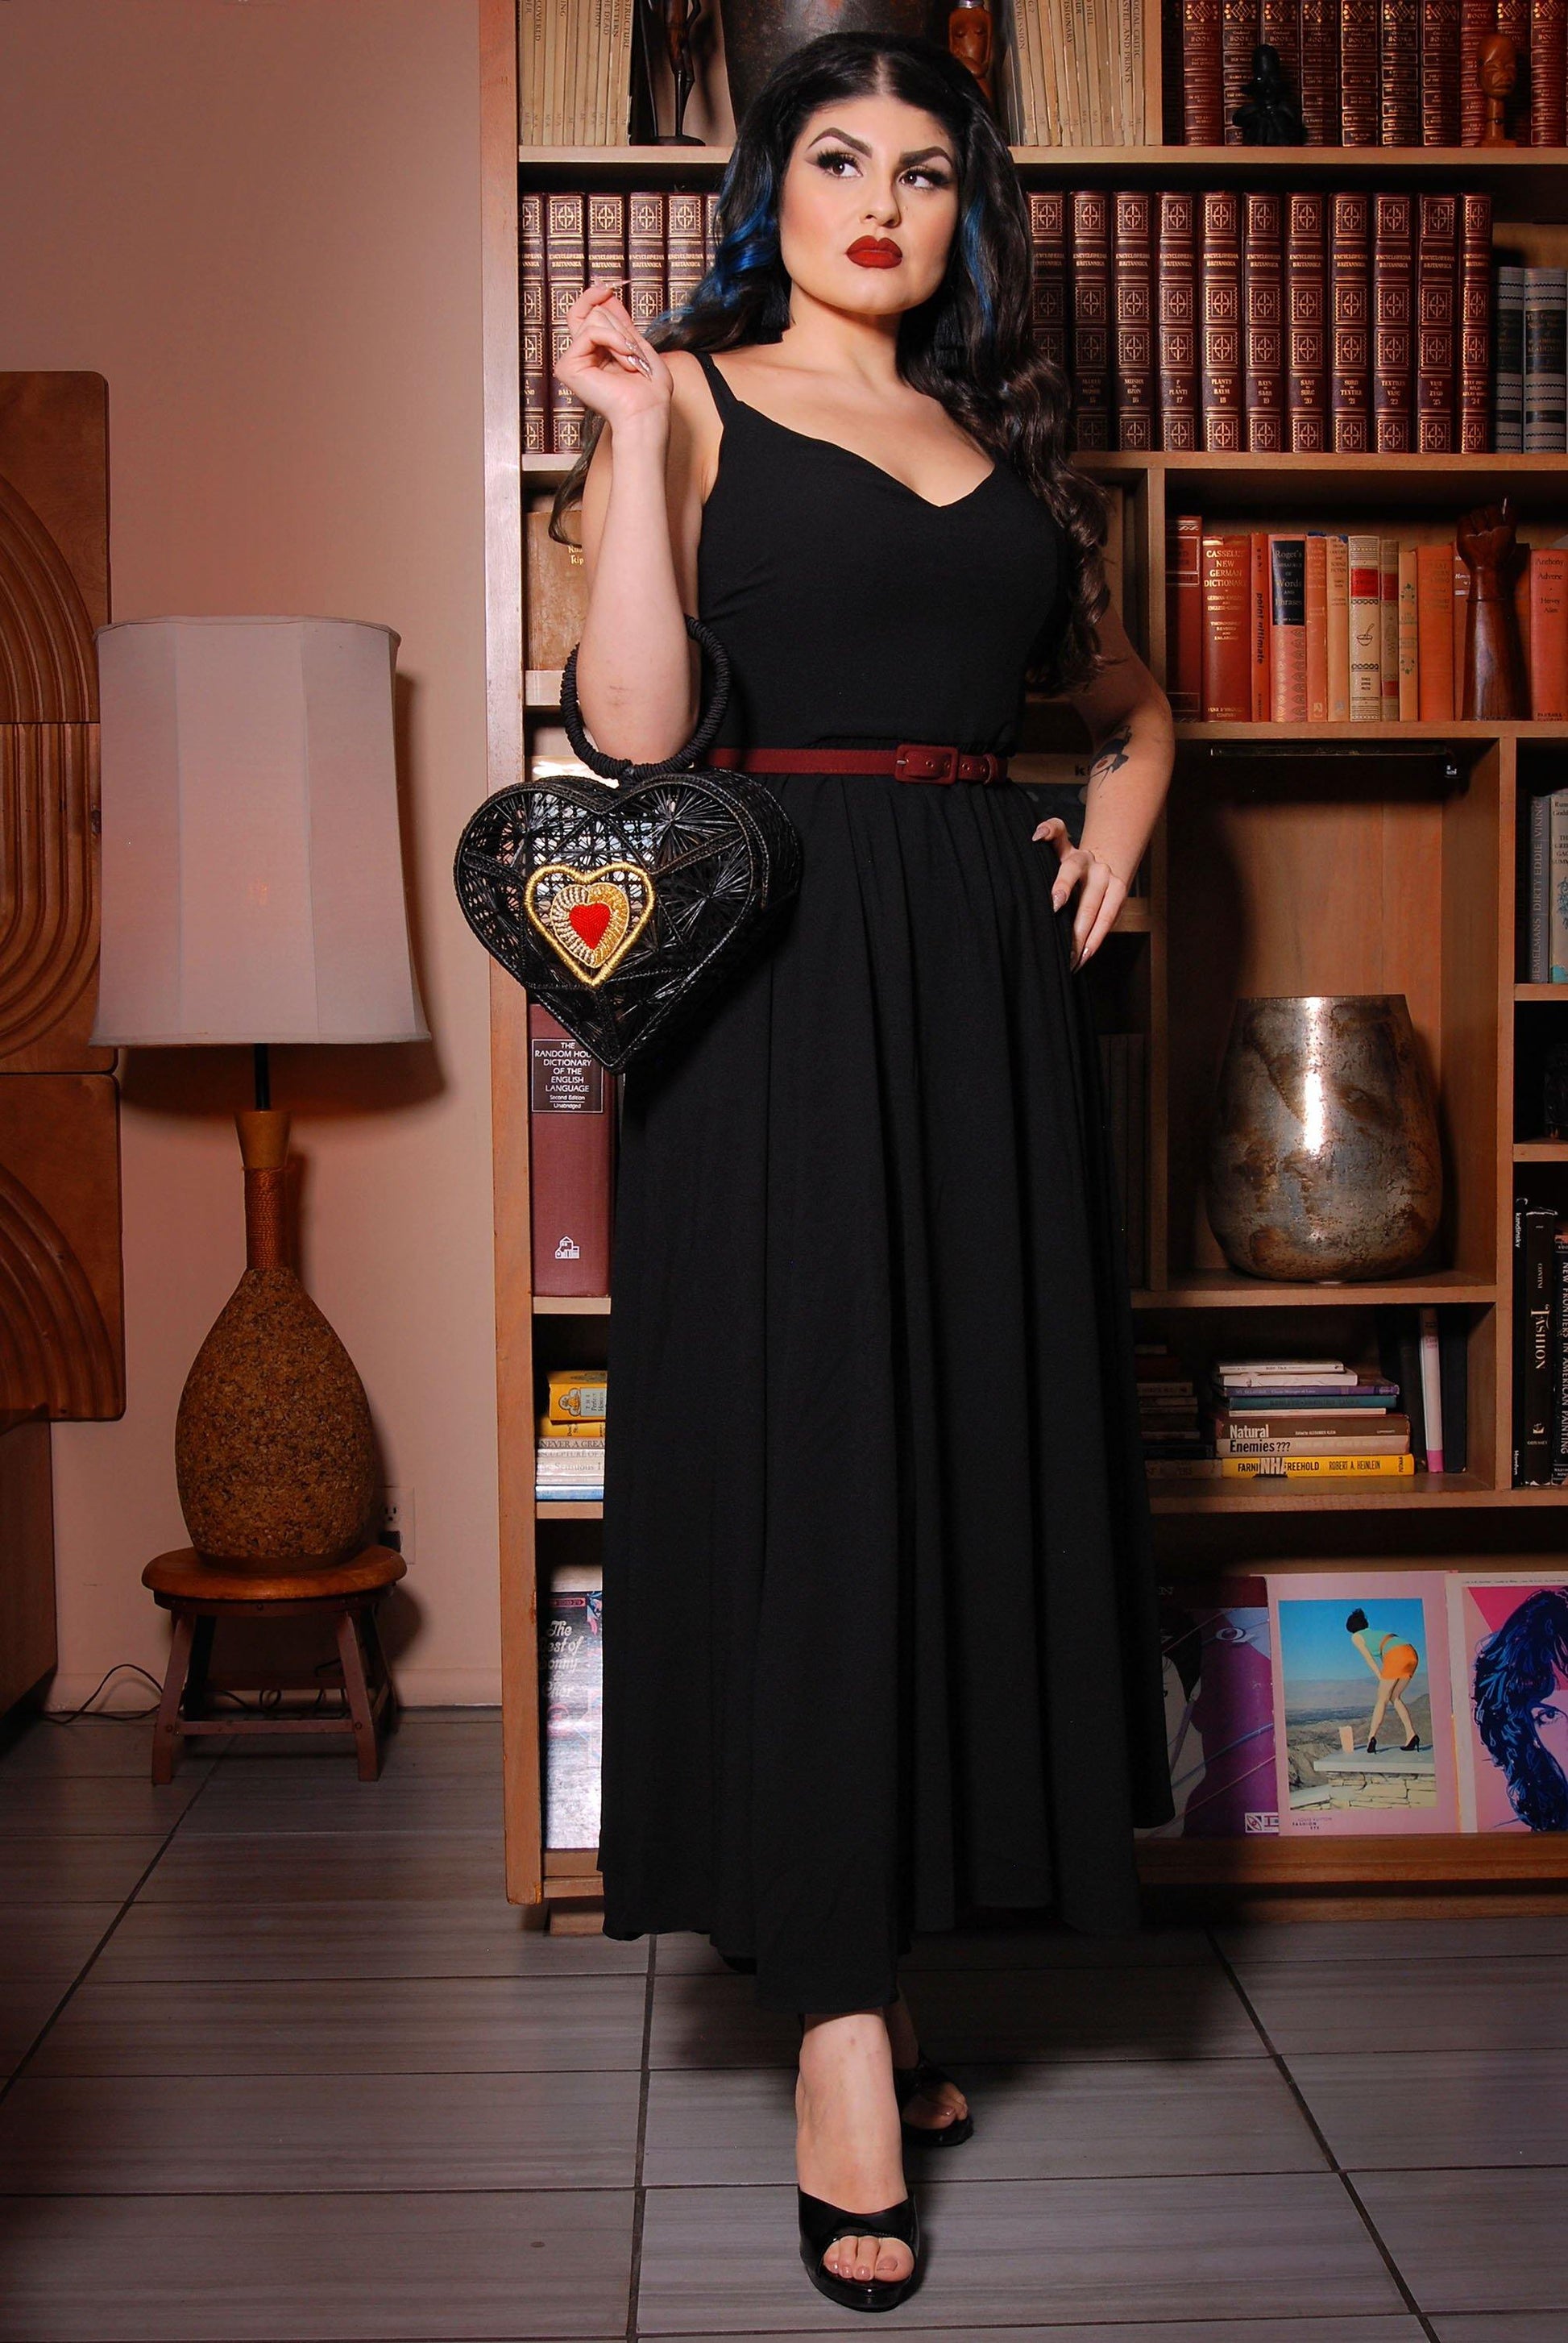 Coming Soon - Amalie Ballerina Daytime Maxi Gown in Solid Black | Pinup Couture - pinupgirlclothing.com